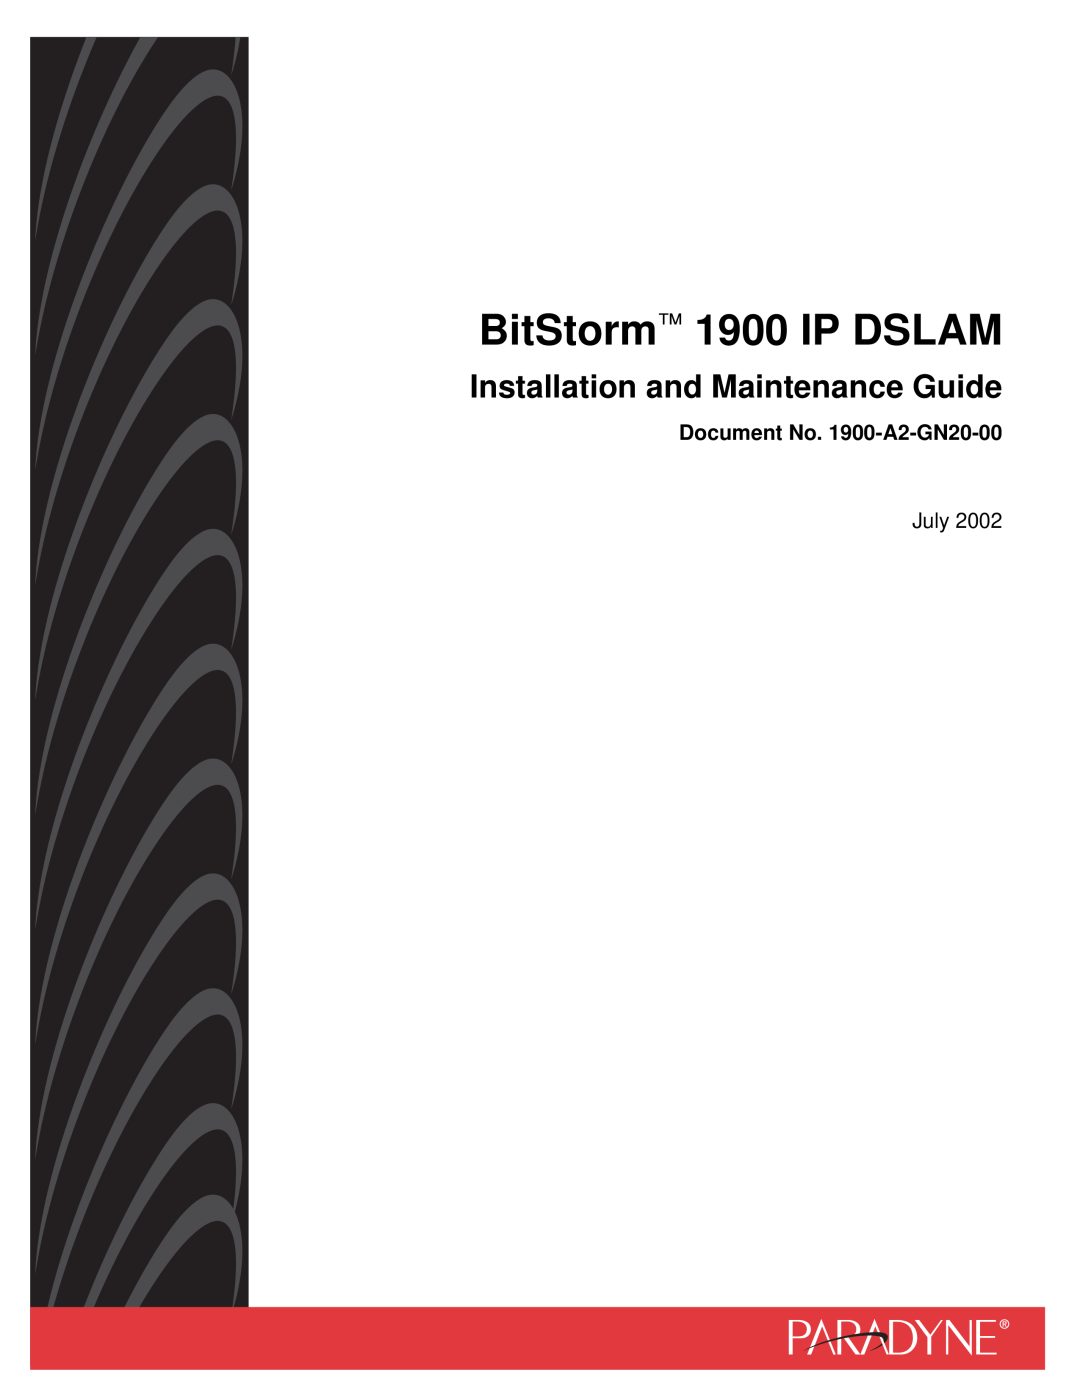 Paradyne manual BitStorm 1900 IP DSLAM, Installation and Maintenance Guide, Document No. 1900-A2-GN20-00, July 